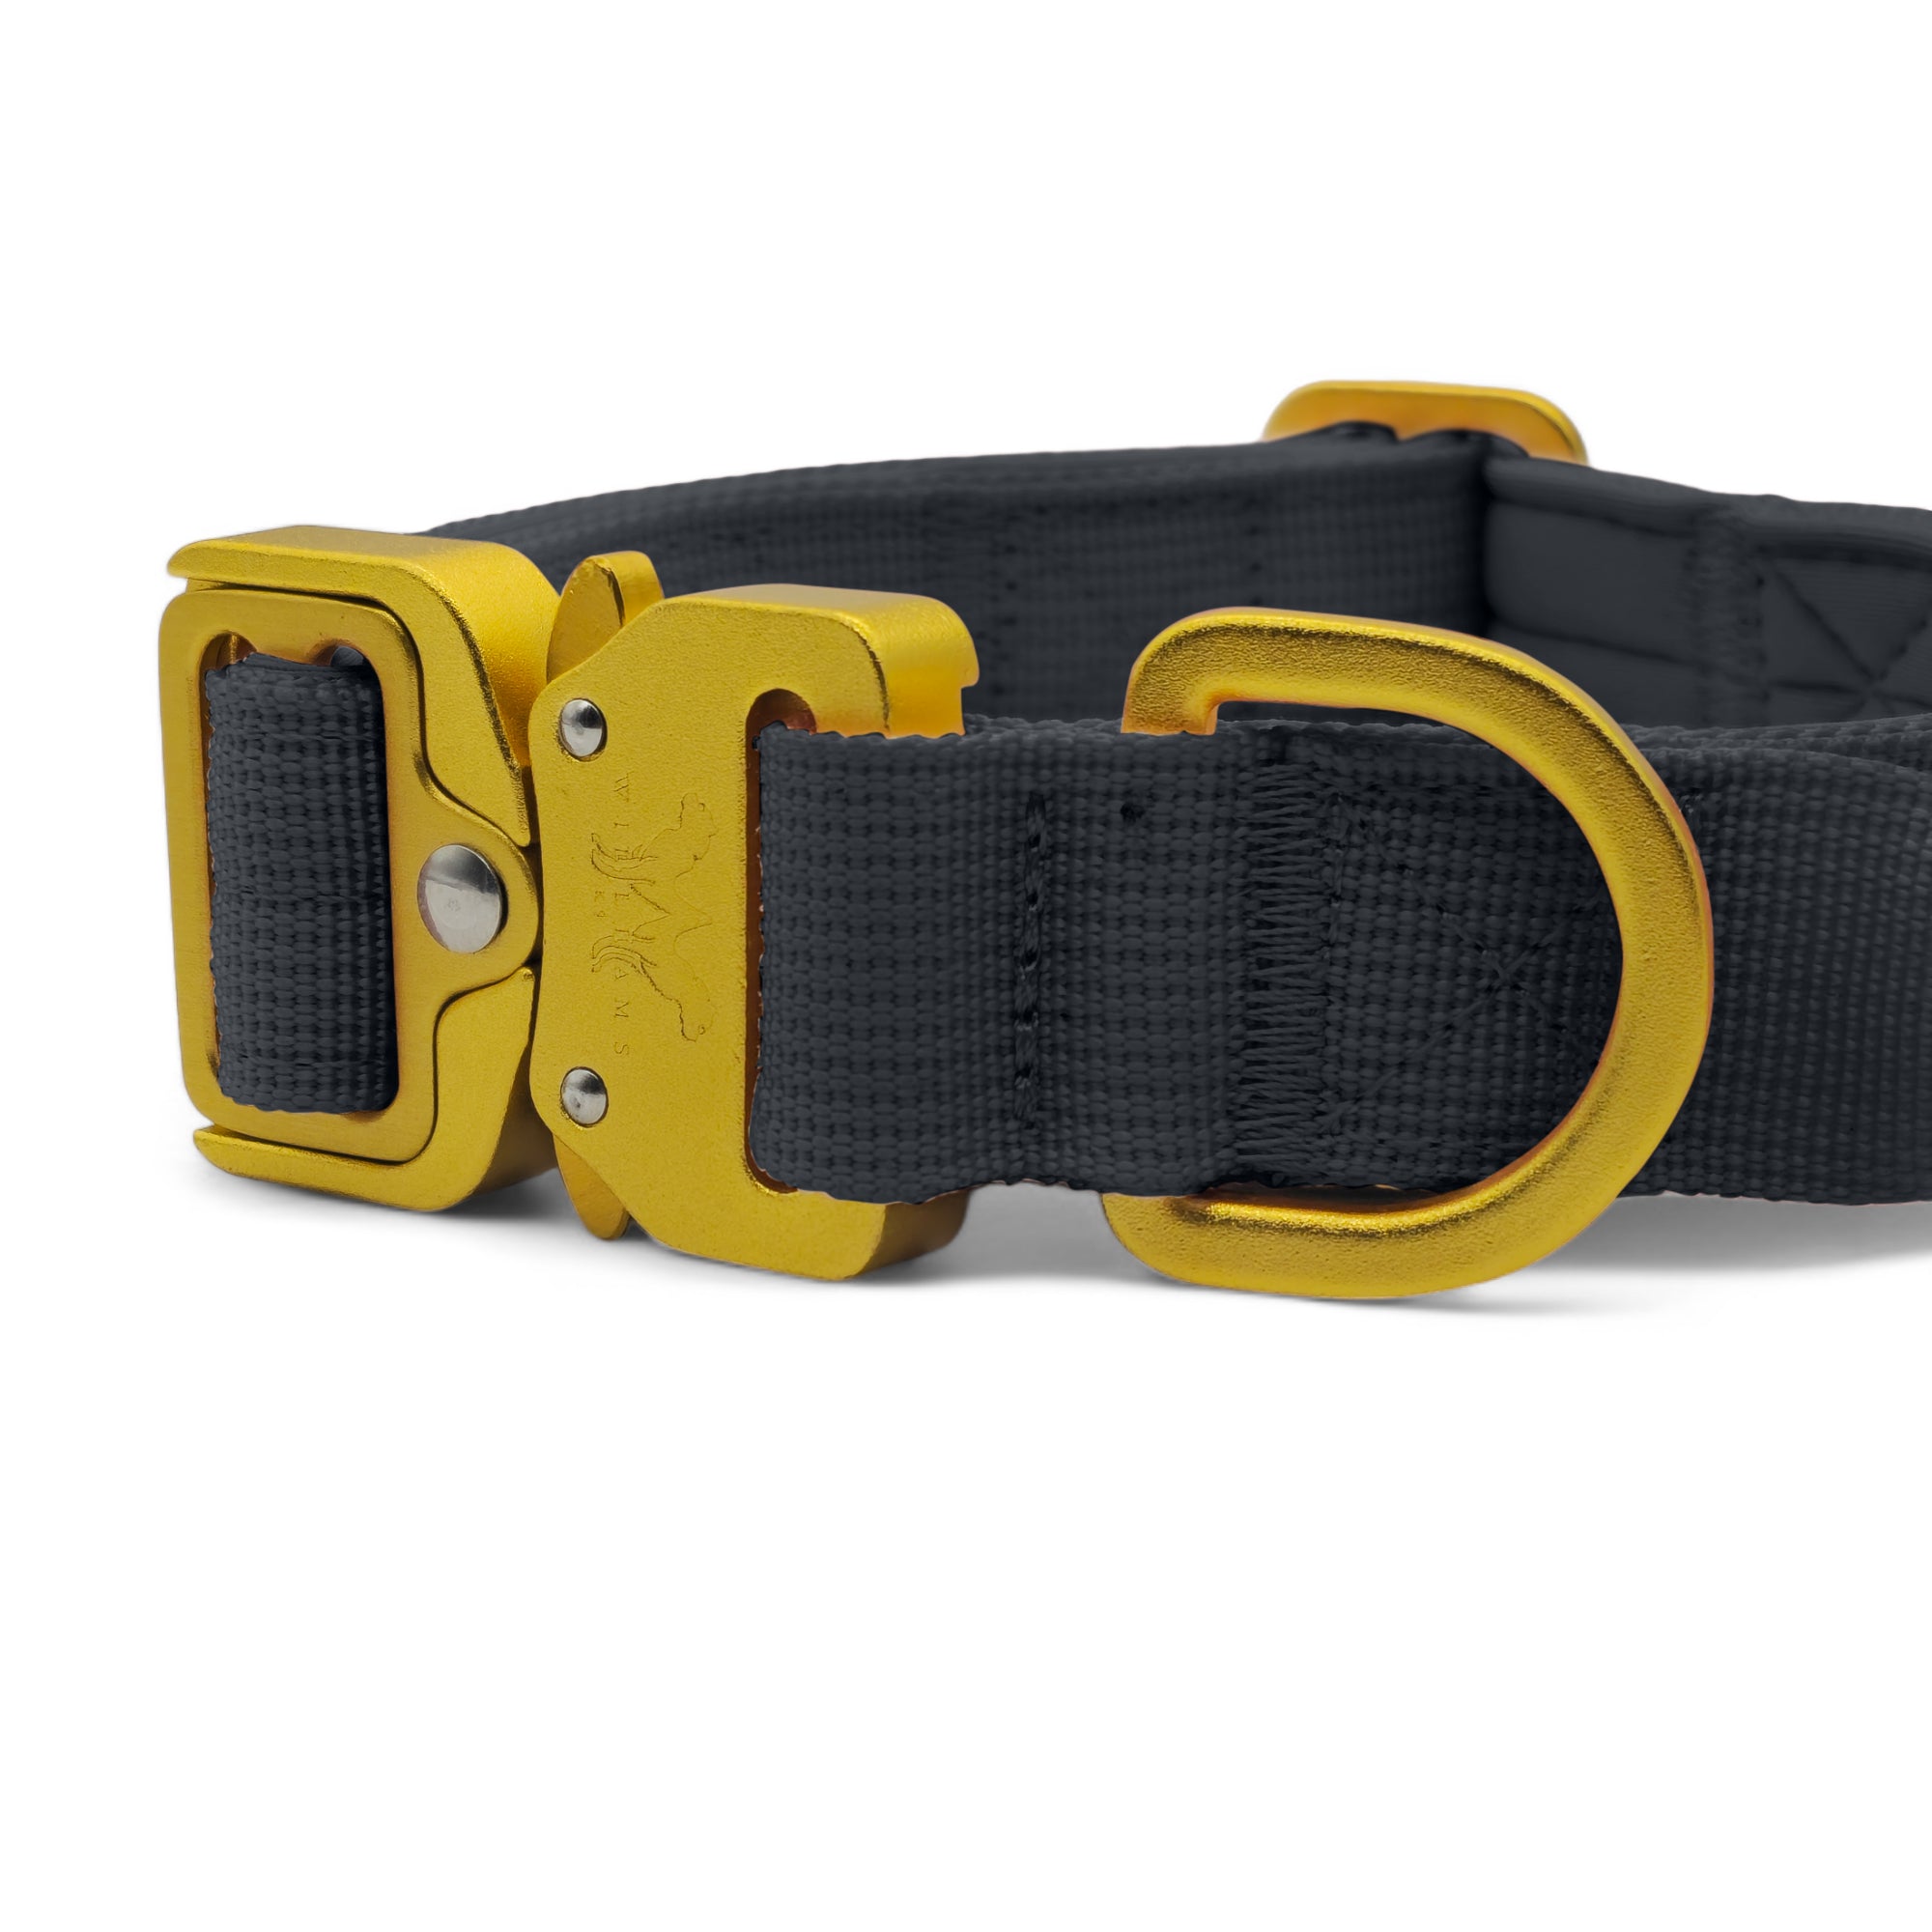 Light Tactical Collar 2.5CM Black | Triple Stitched Nylon Lightweight Gold Aluminium Buckle + D Ring Adjustable Collar With Handle